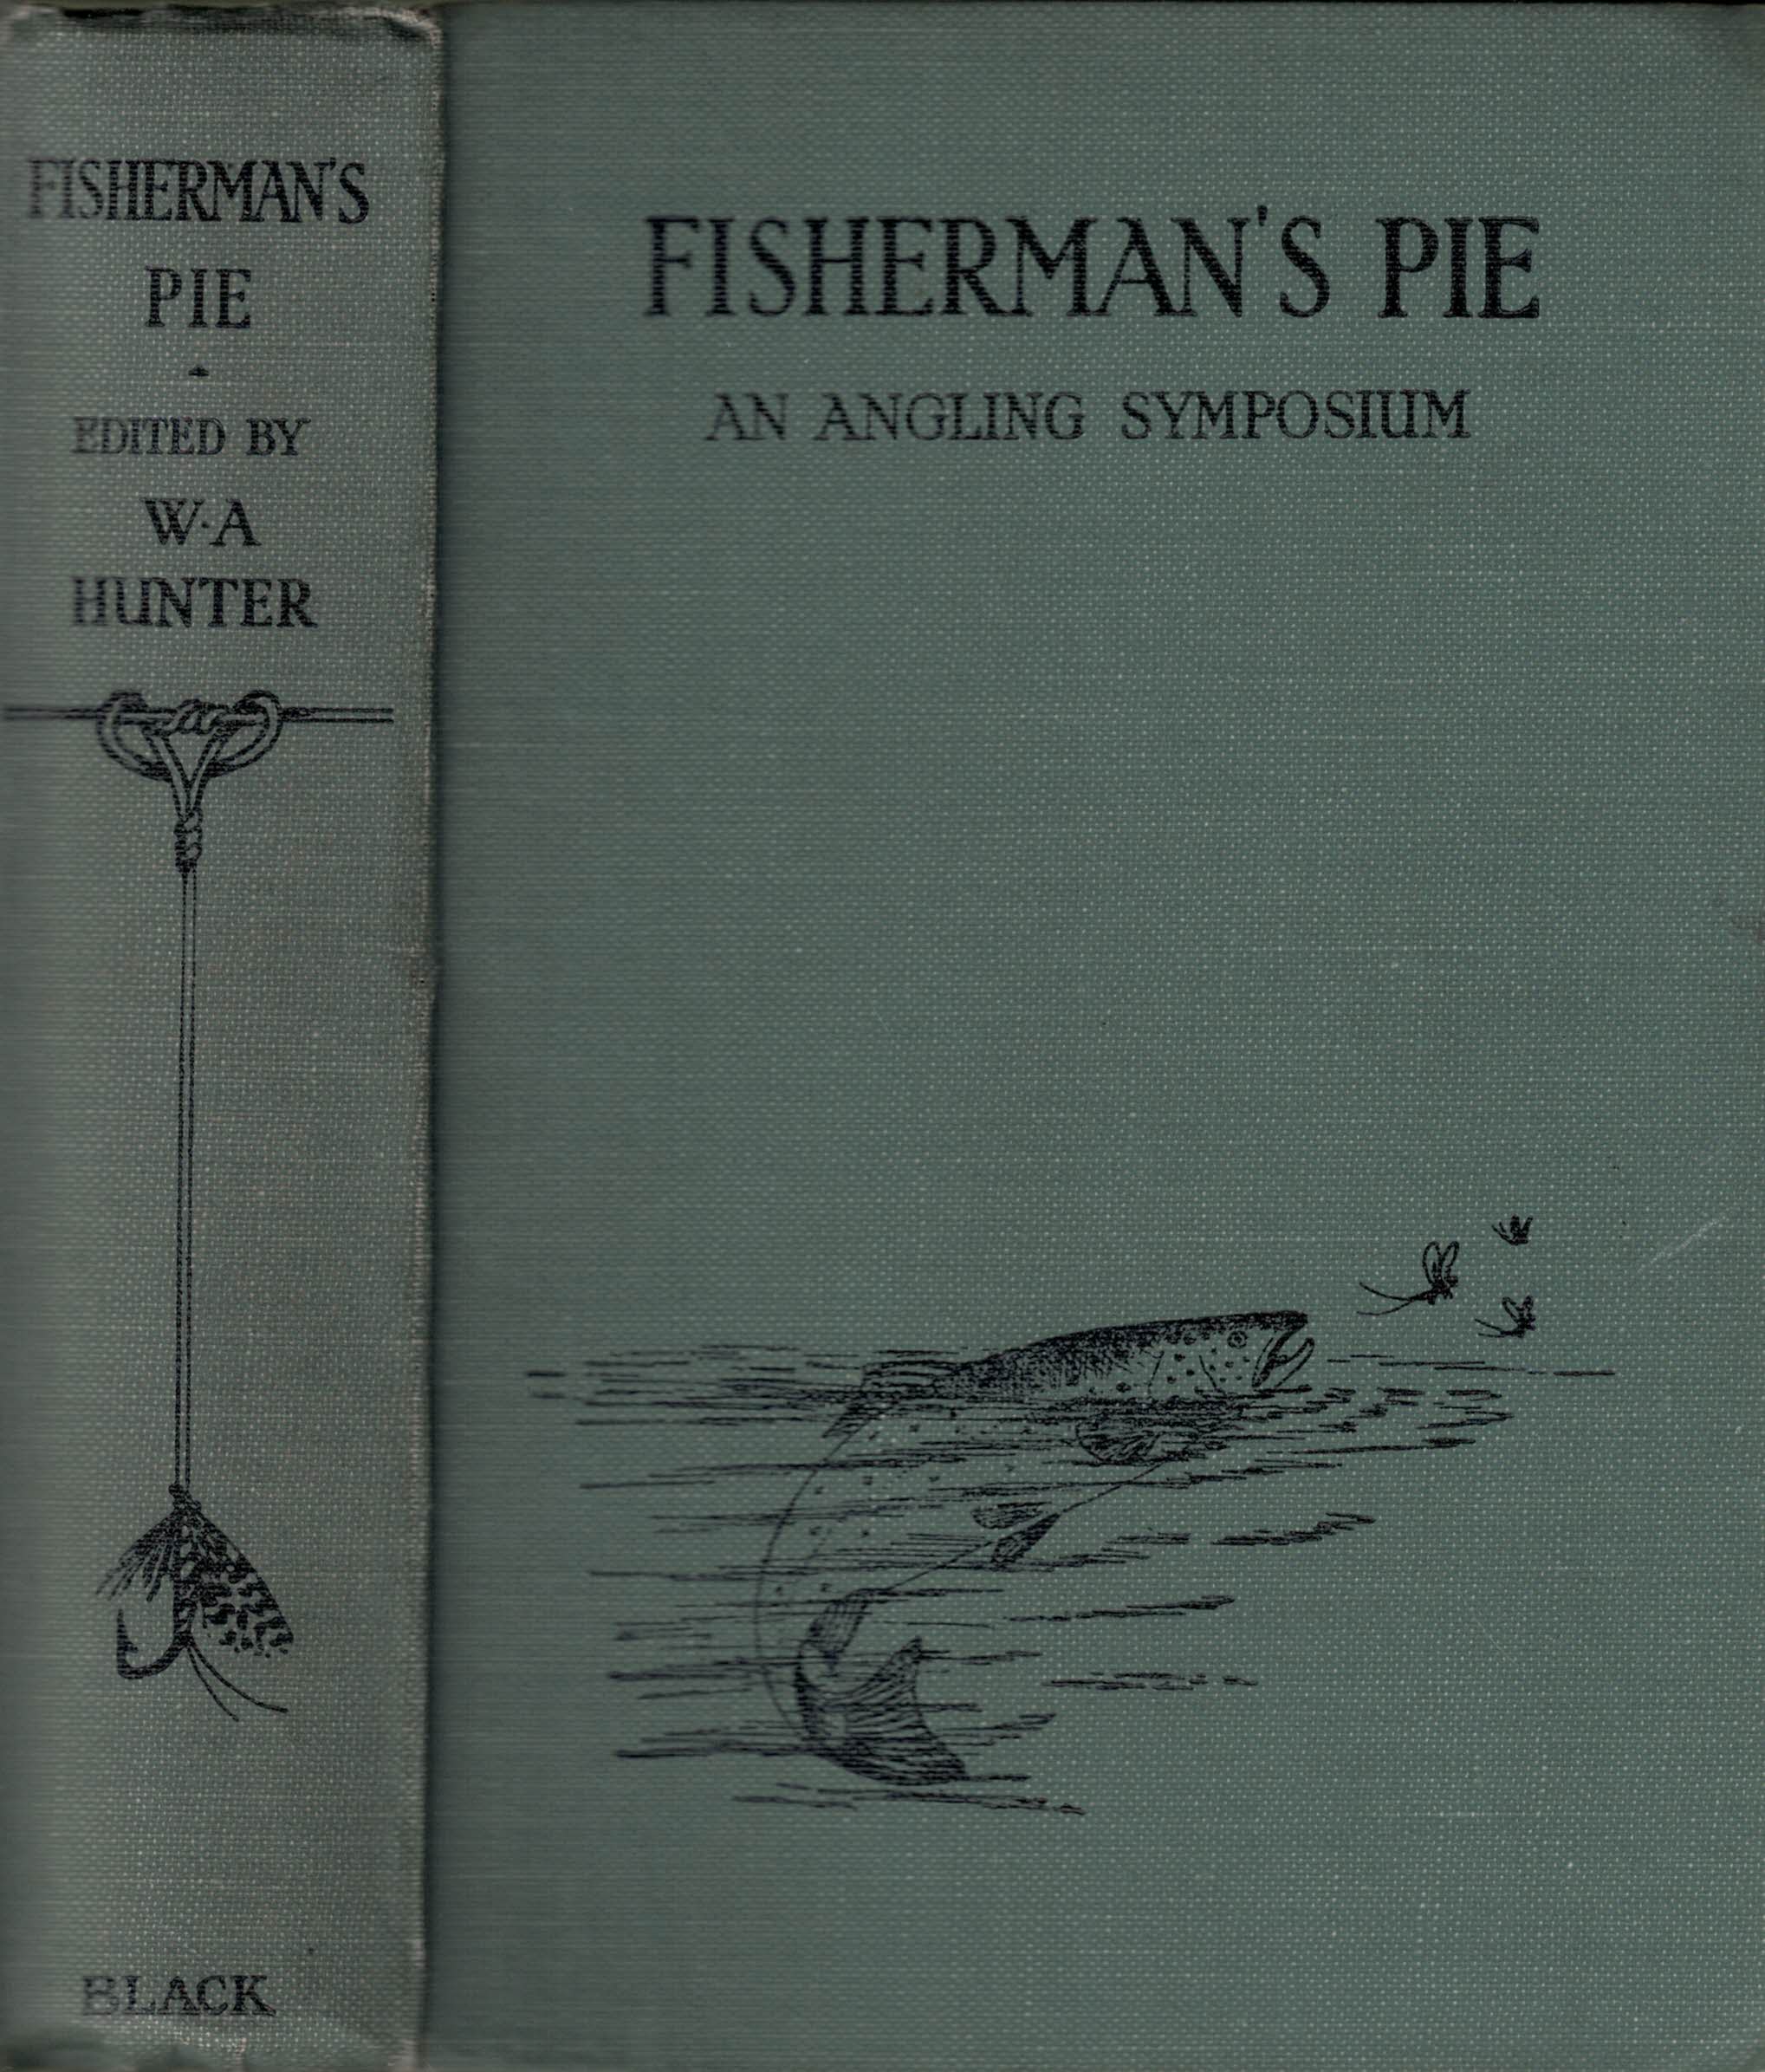 Fisherman's Pie. An Angling Symposium.